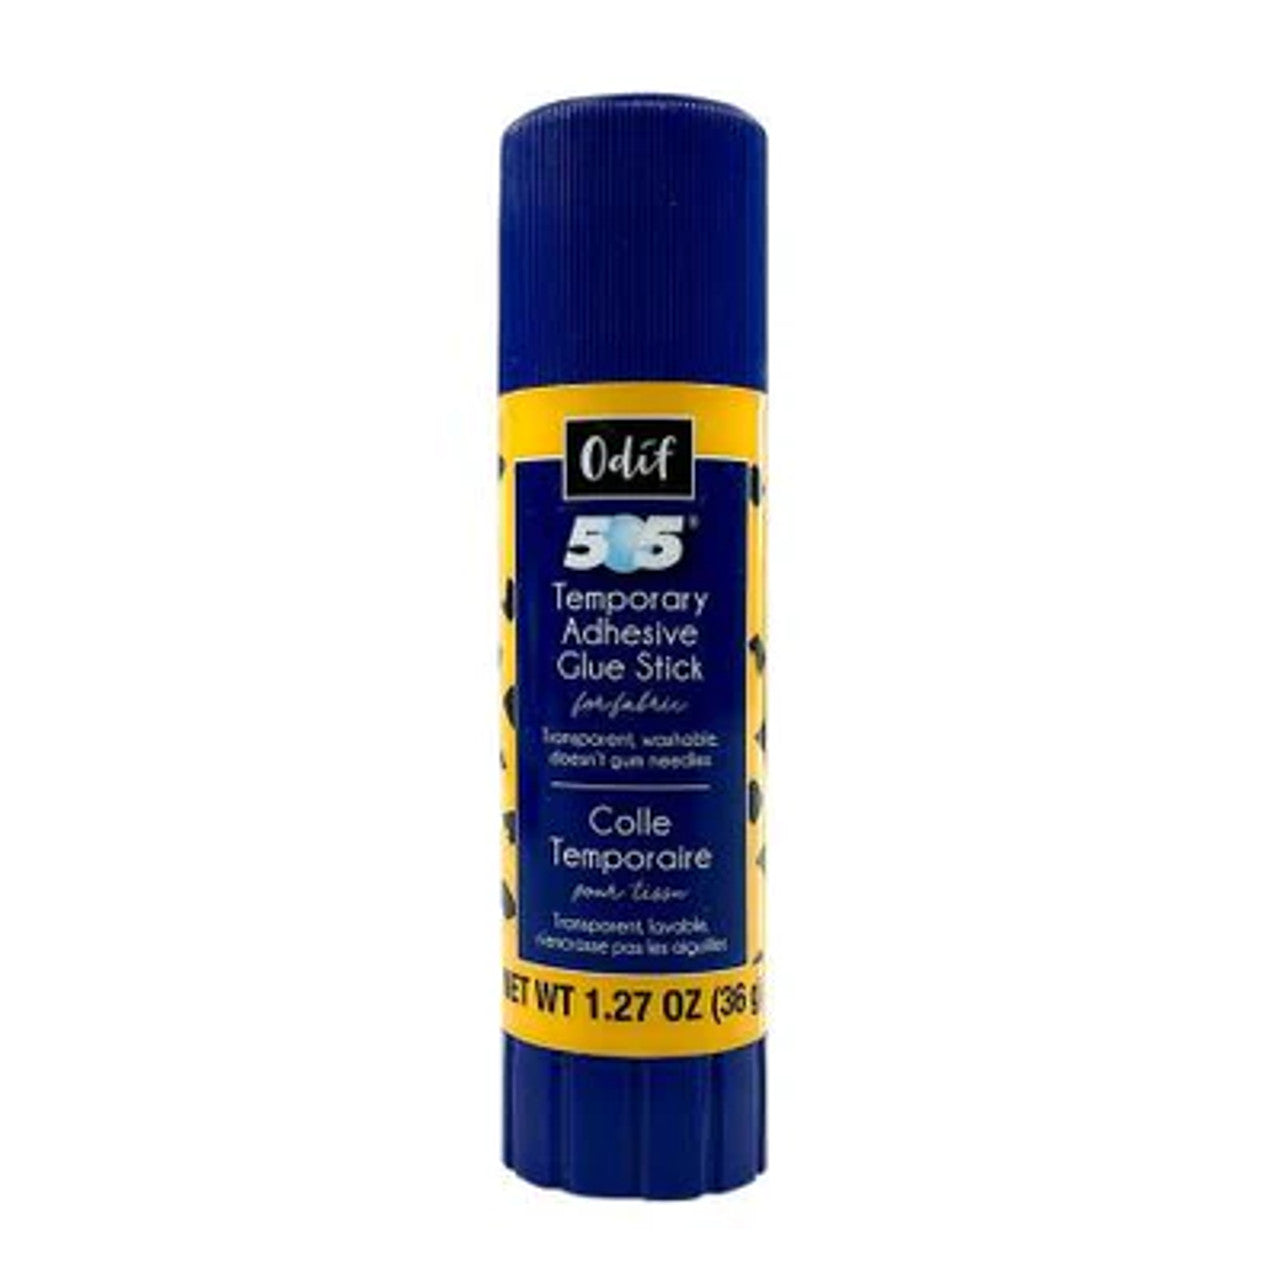 505 Temporary Adhesive Glue Stick by Odif